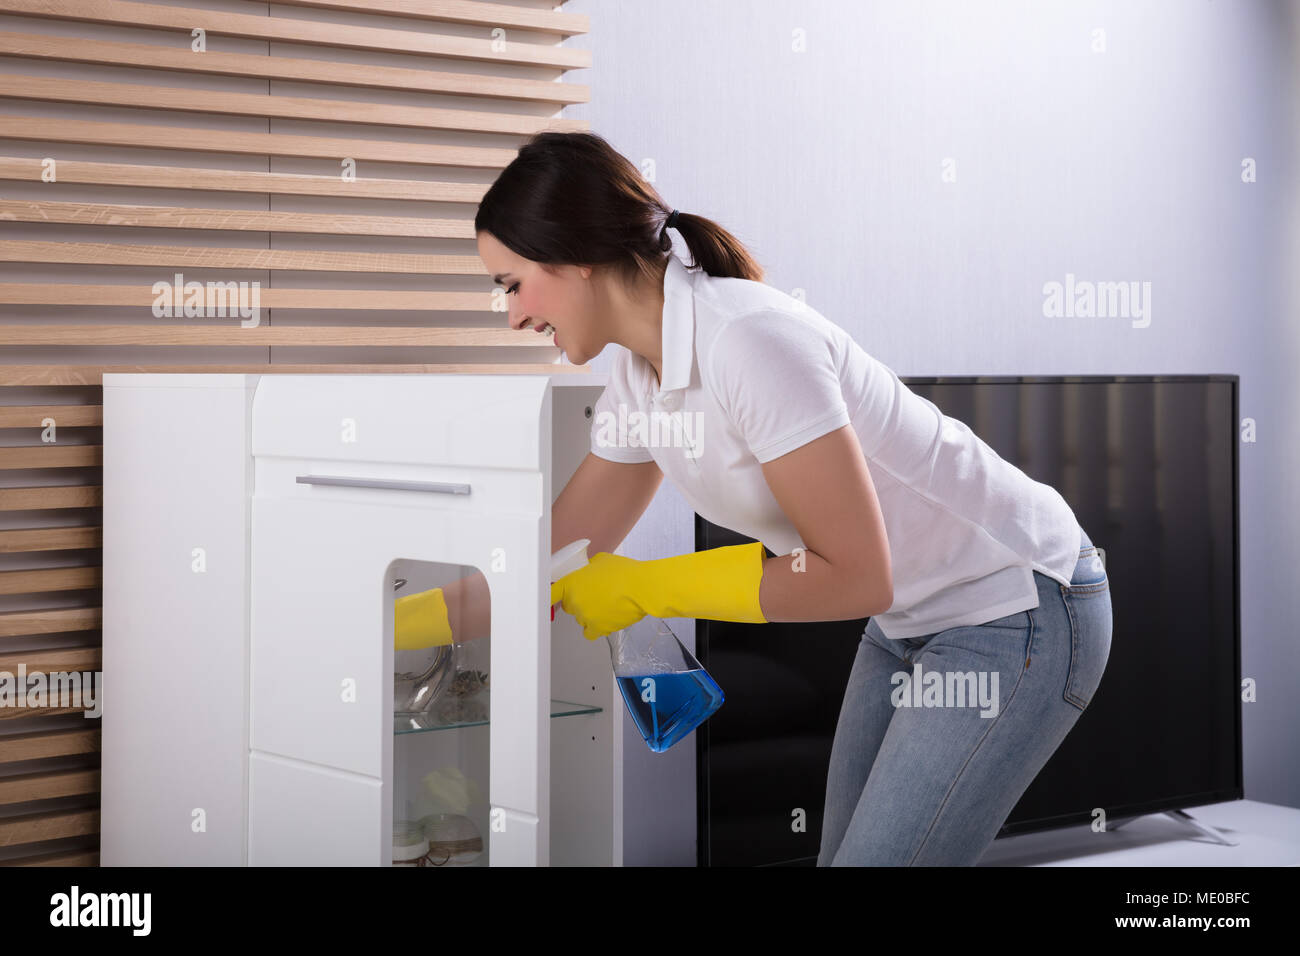 Portrait Of A Smiling Young Woman Cleaning Furniture With Spray Stock Photo